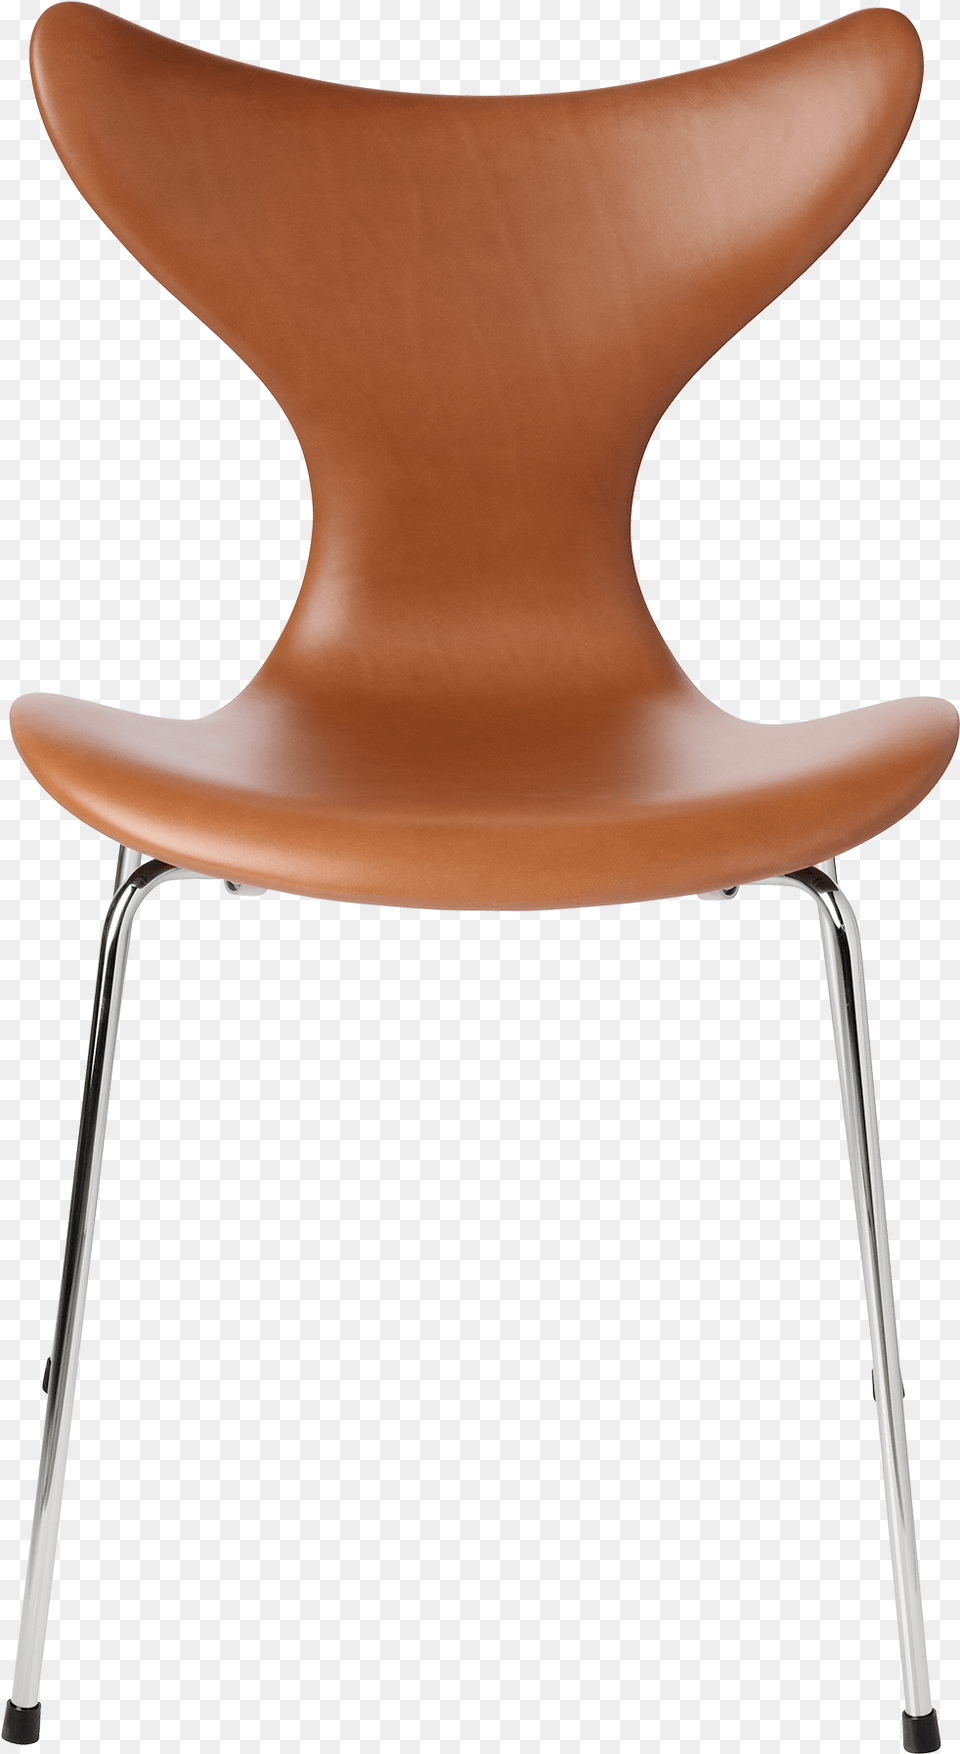 Lily Chair Arne Jacobsen Elegance Leather Lily Heart Chair Arne Jacobsen, Furniture, Plywood, Wood, Armchair Free Png Download